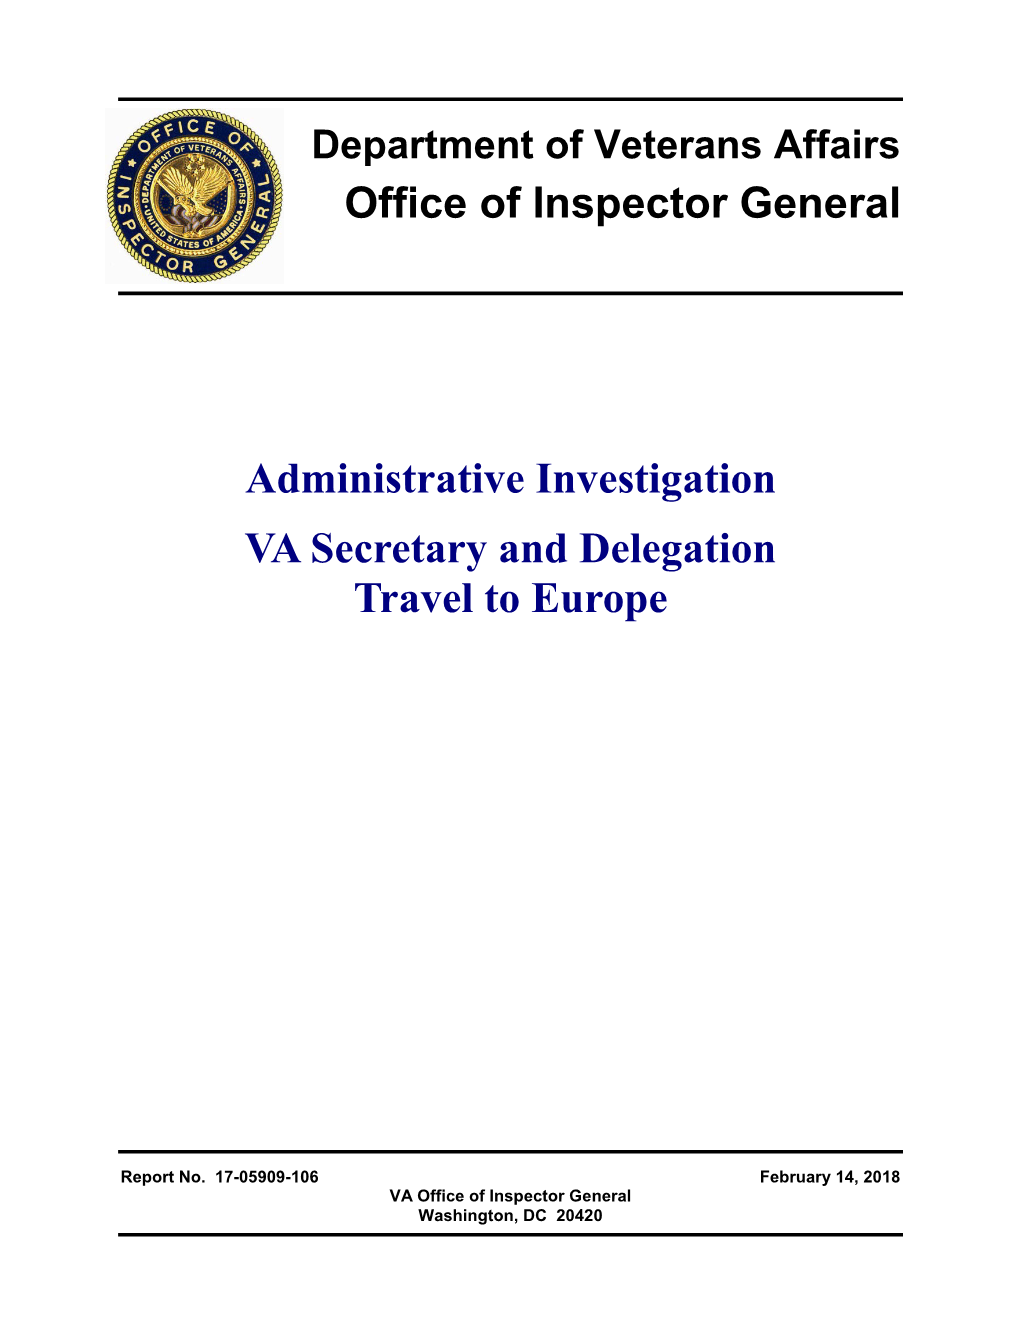 Department of Veterans Affairs Office of Inspector General Administrative Investigation